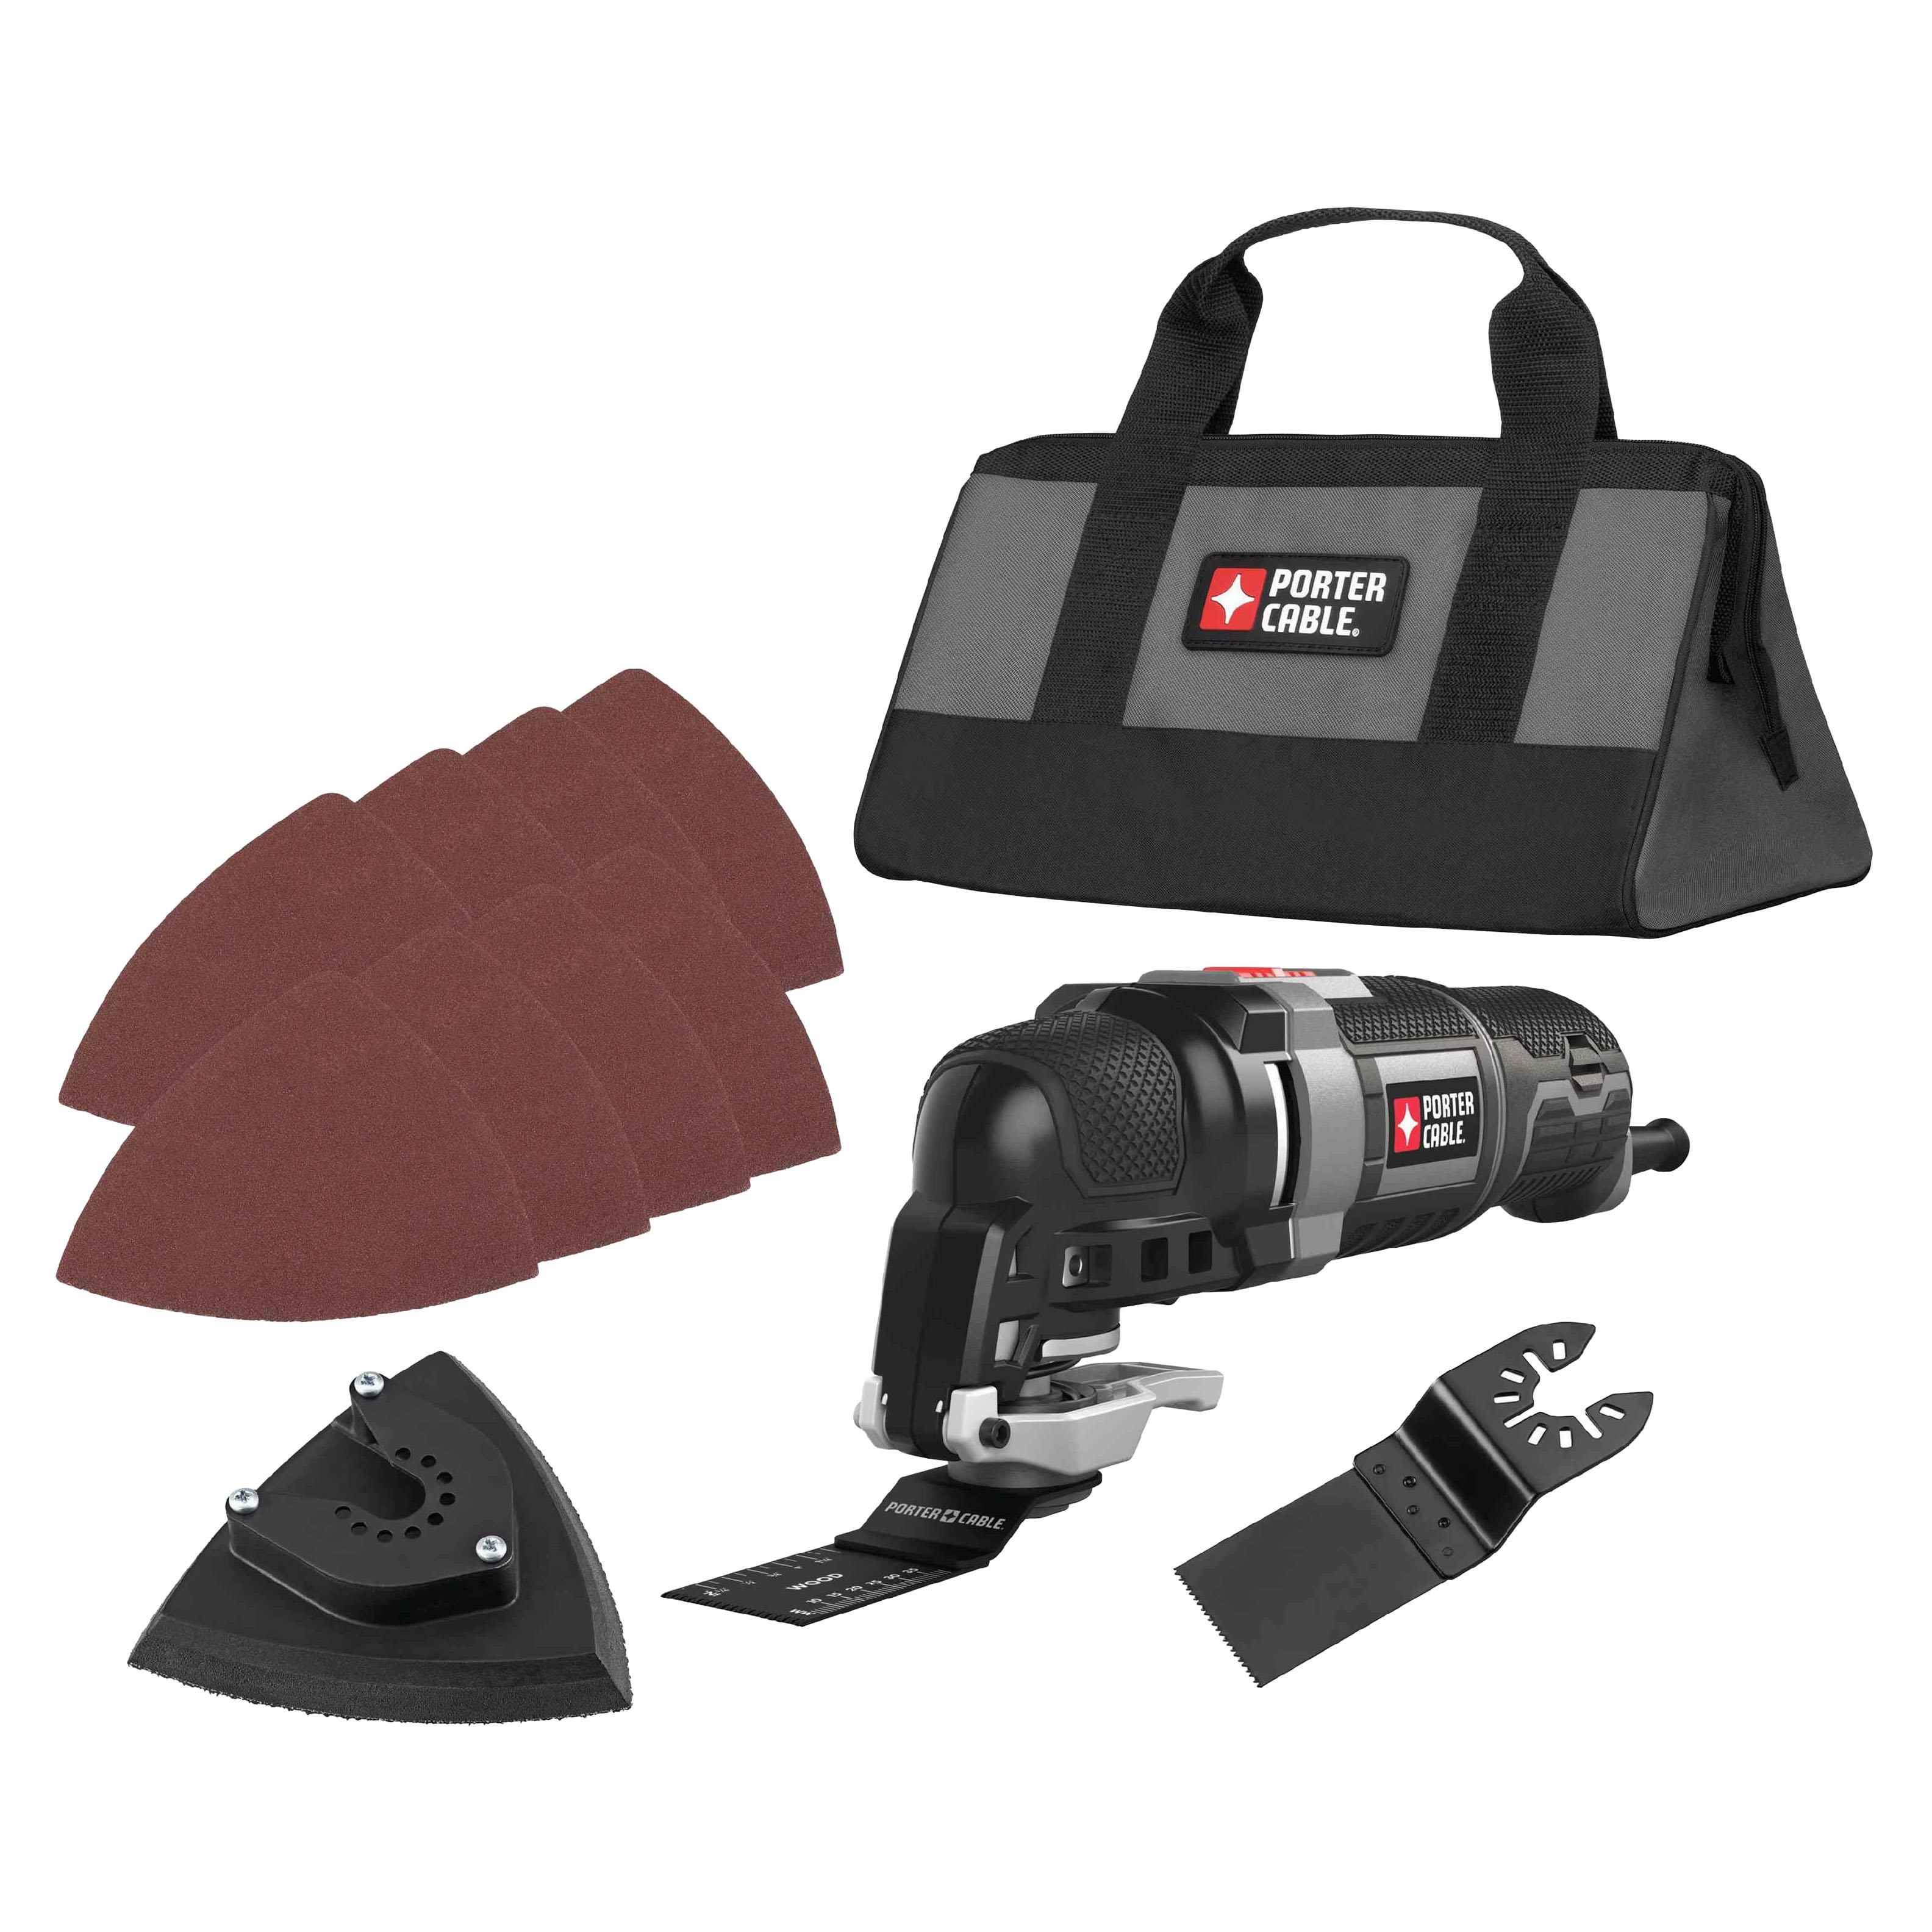 Porter Cable 3.0 AMP 11 Piece Oscillating Tool Kit